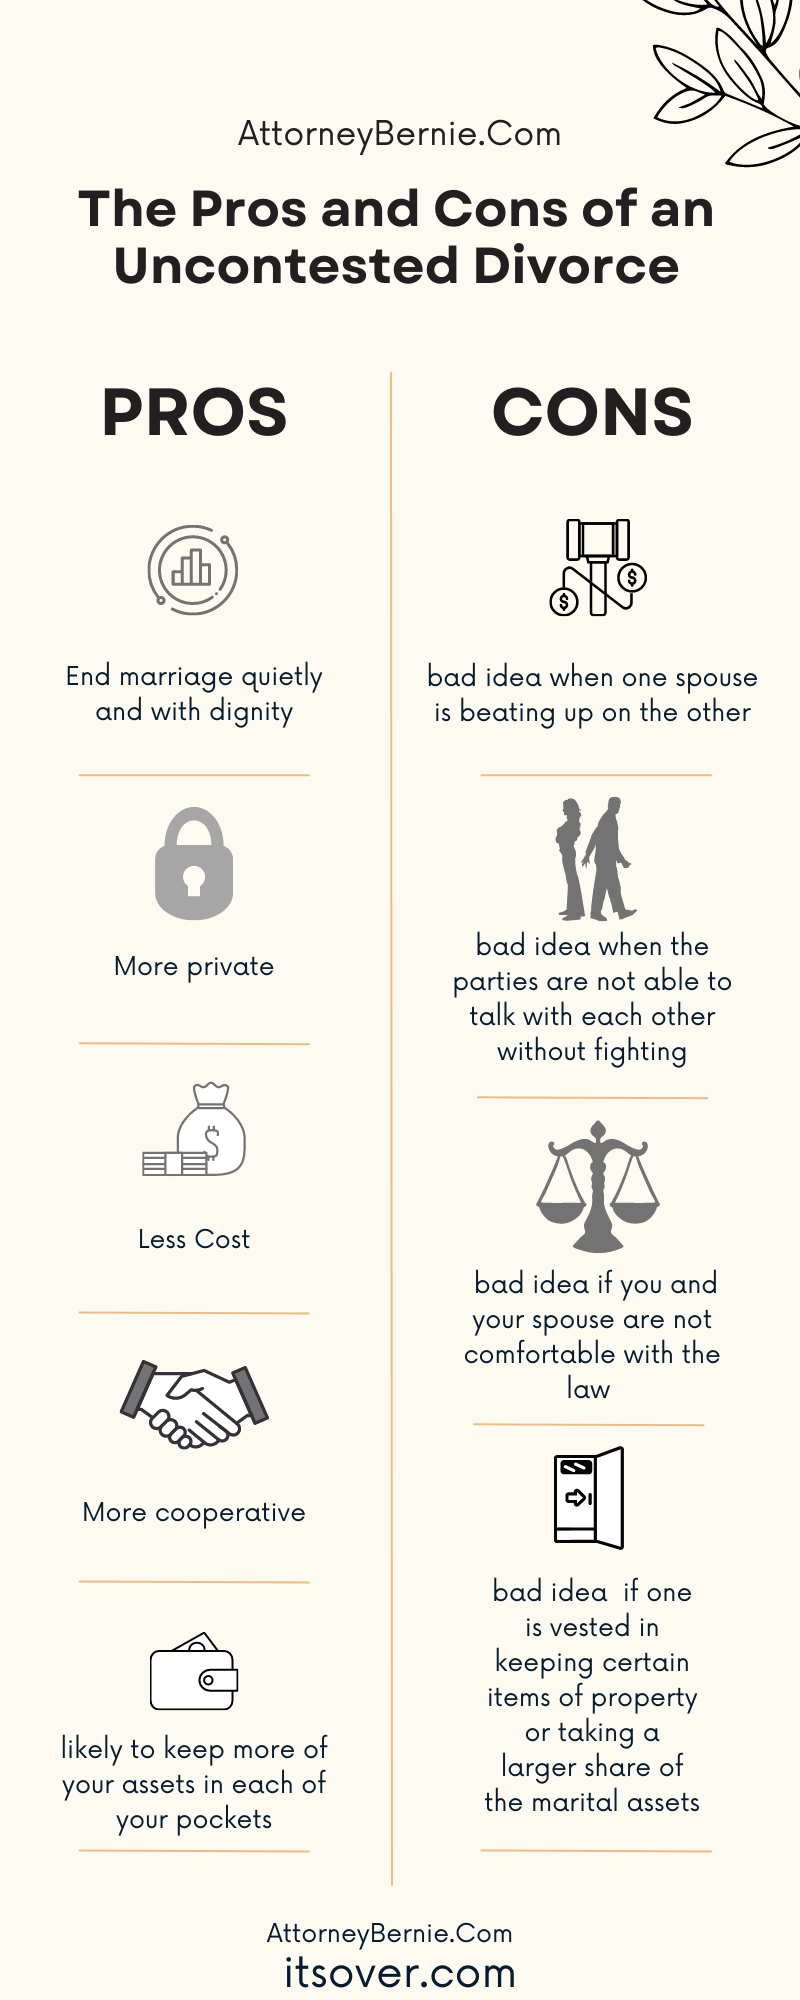 The Pros and Cons of an Uncontested Divorce Infographic